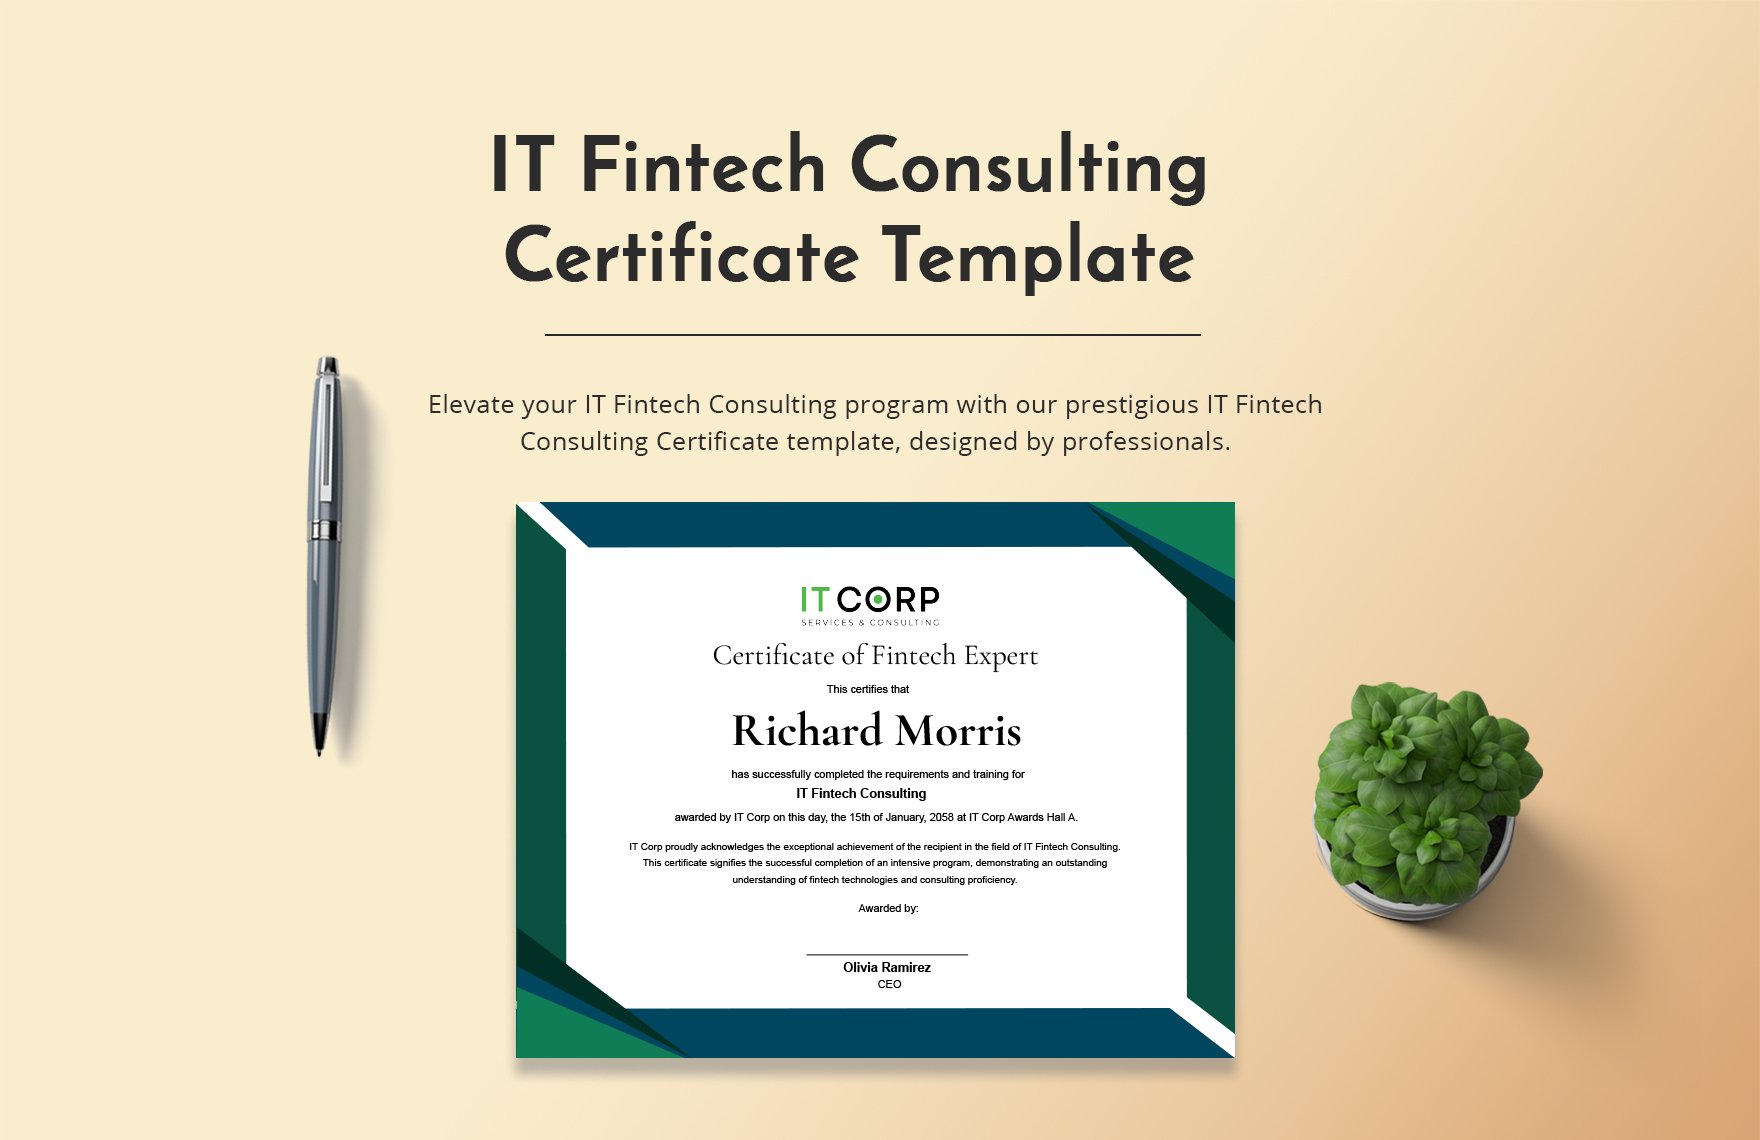 IT Fintech Consulting Certificate Template in Word, Illustrator, PSD